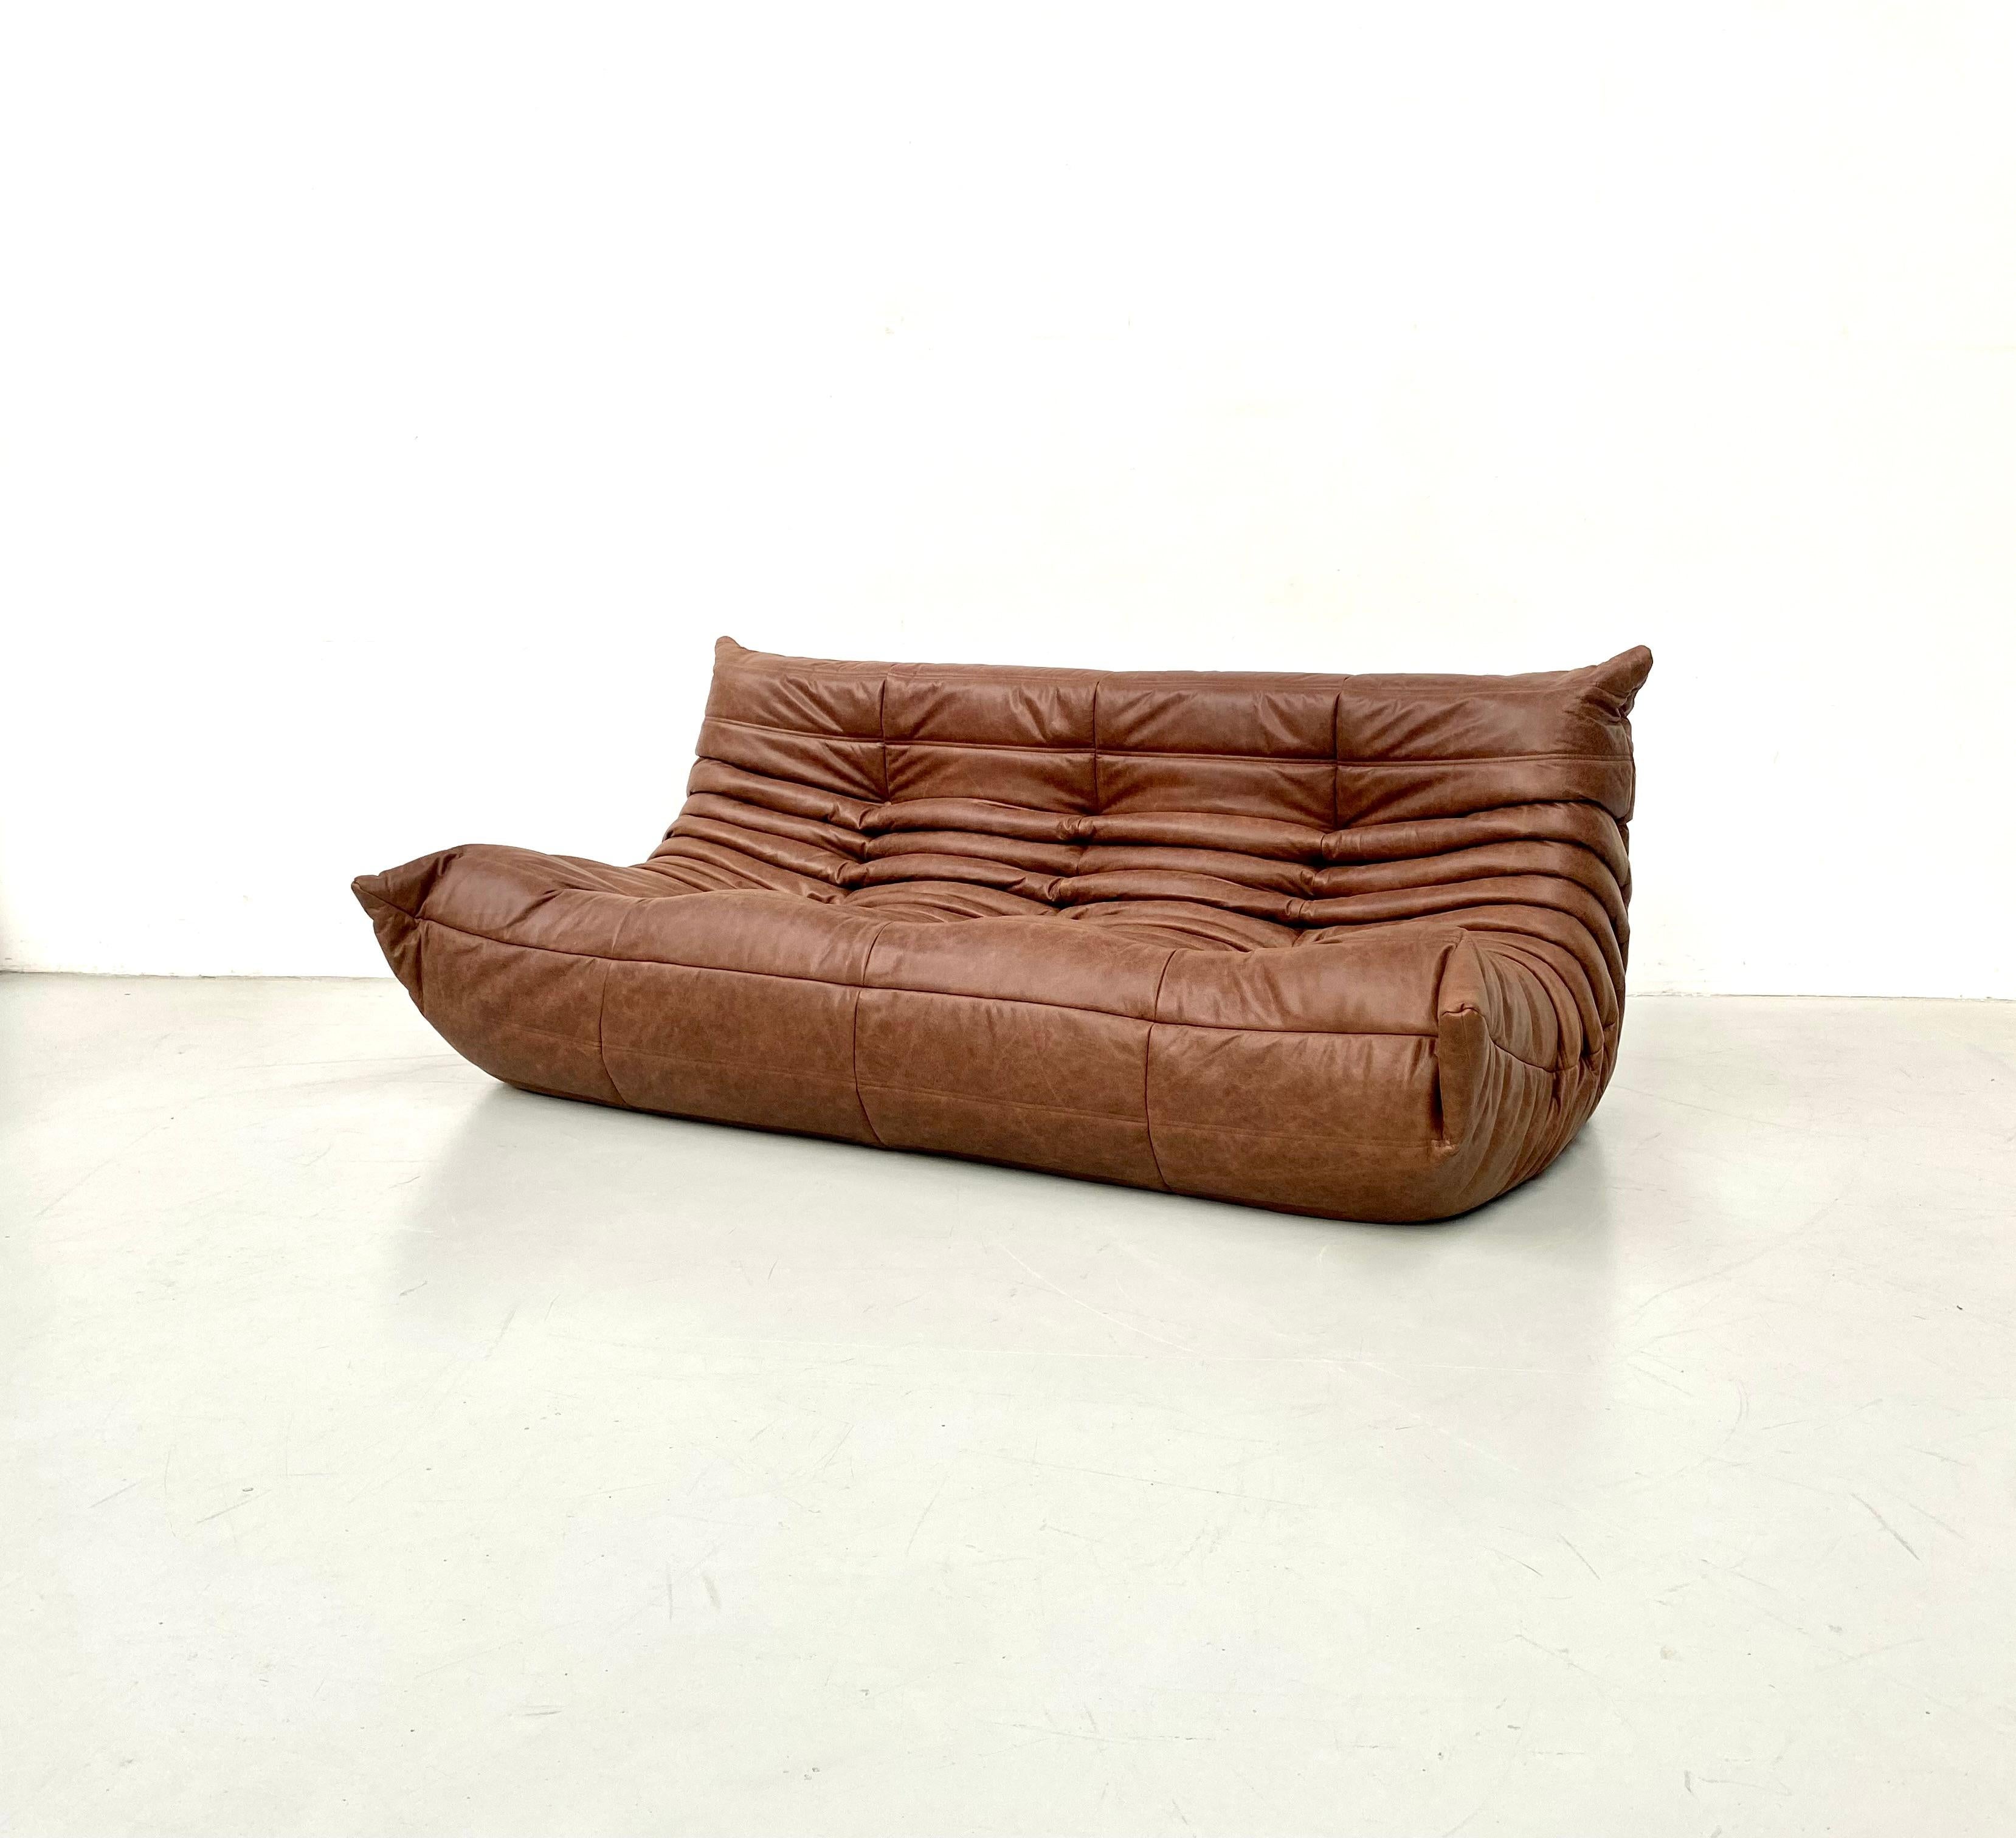 Mid-Century Modern French Vintage Togo Sofa in Brown Leather by Michel Ducaroy for Ligne Roset.